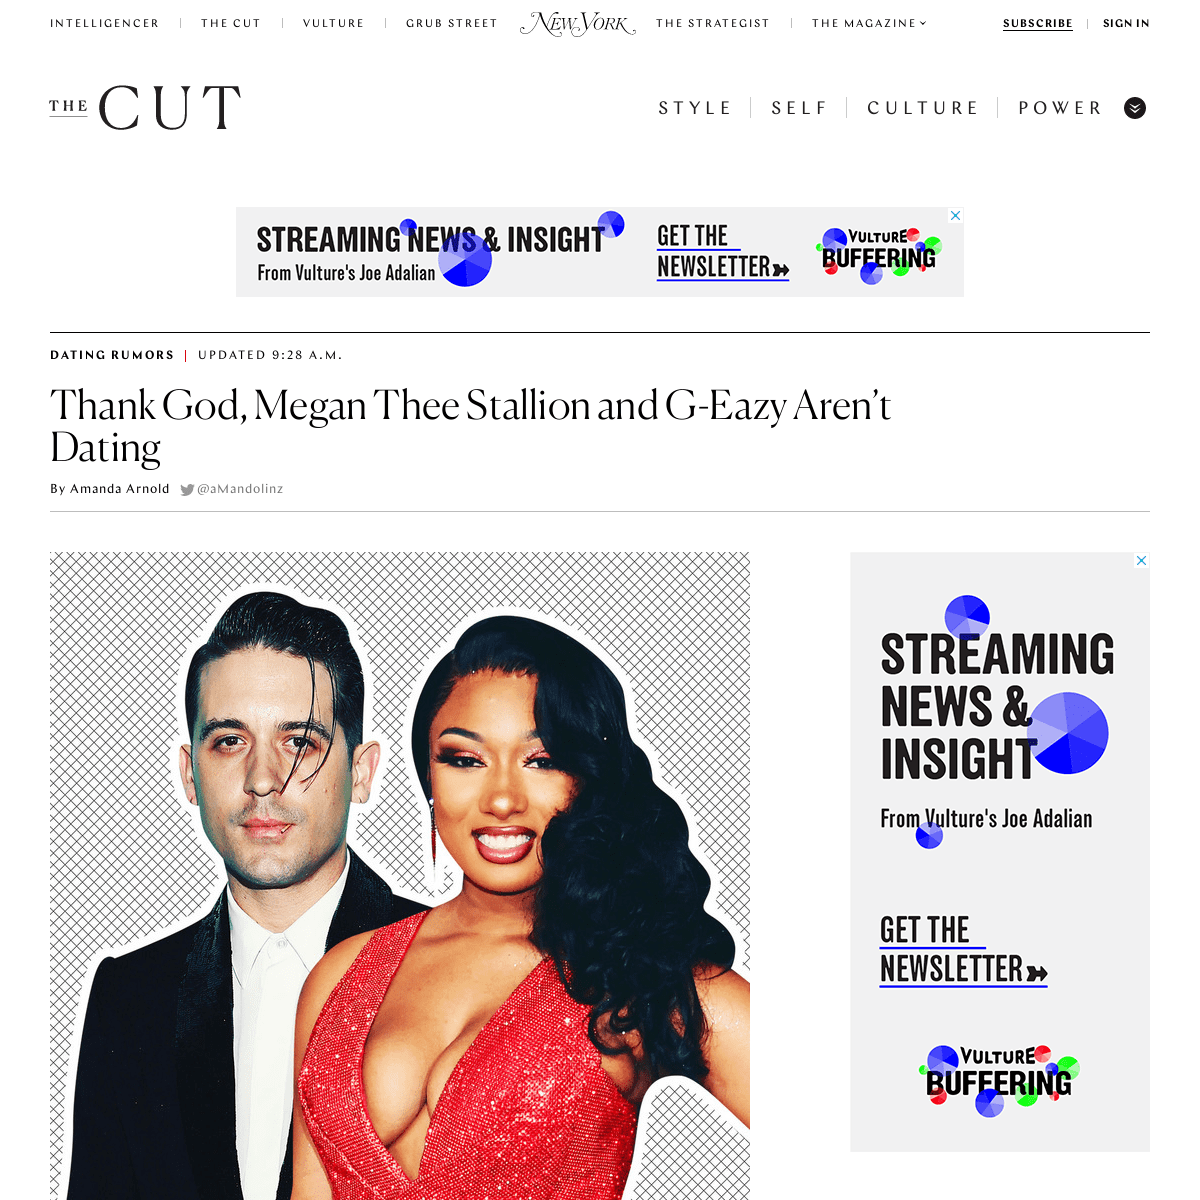 A complete backup of www.thecut.com/2020/02/megan-thee-stallion-g-eazy-dating-rumors.html